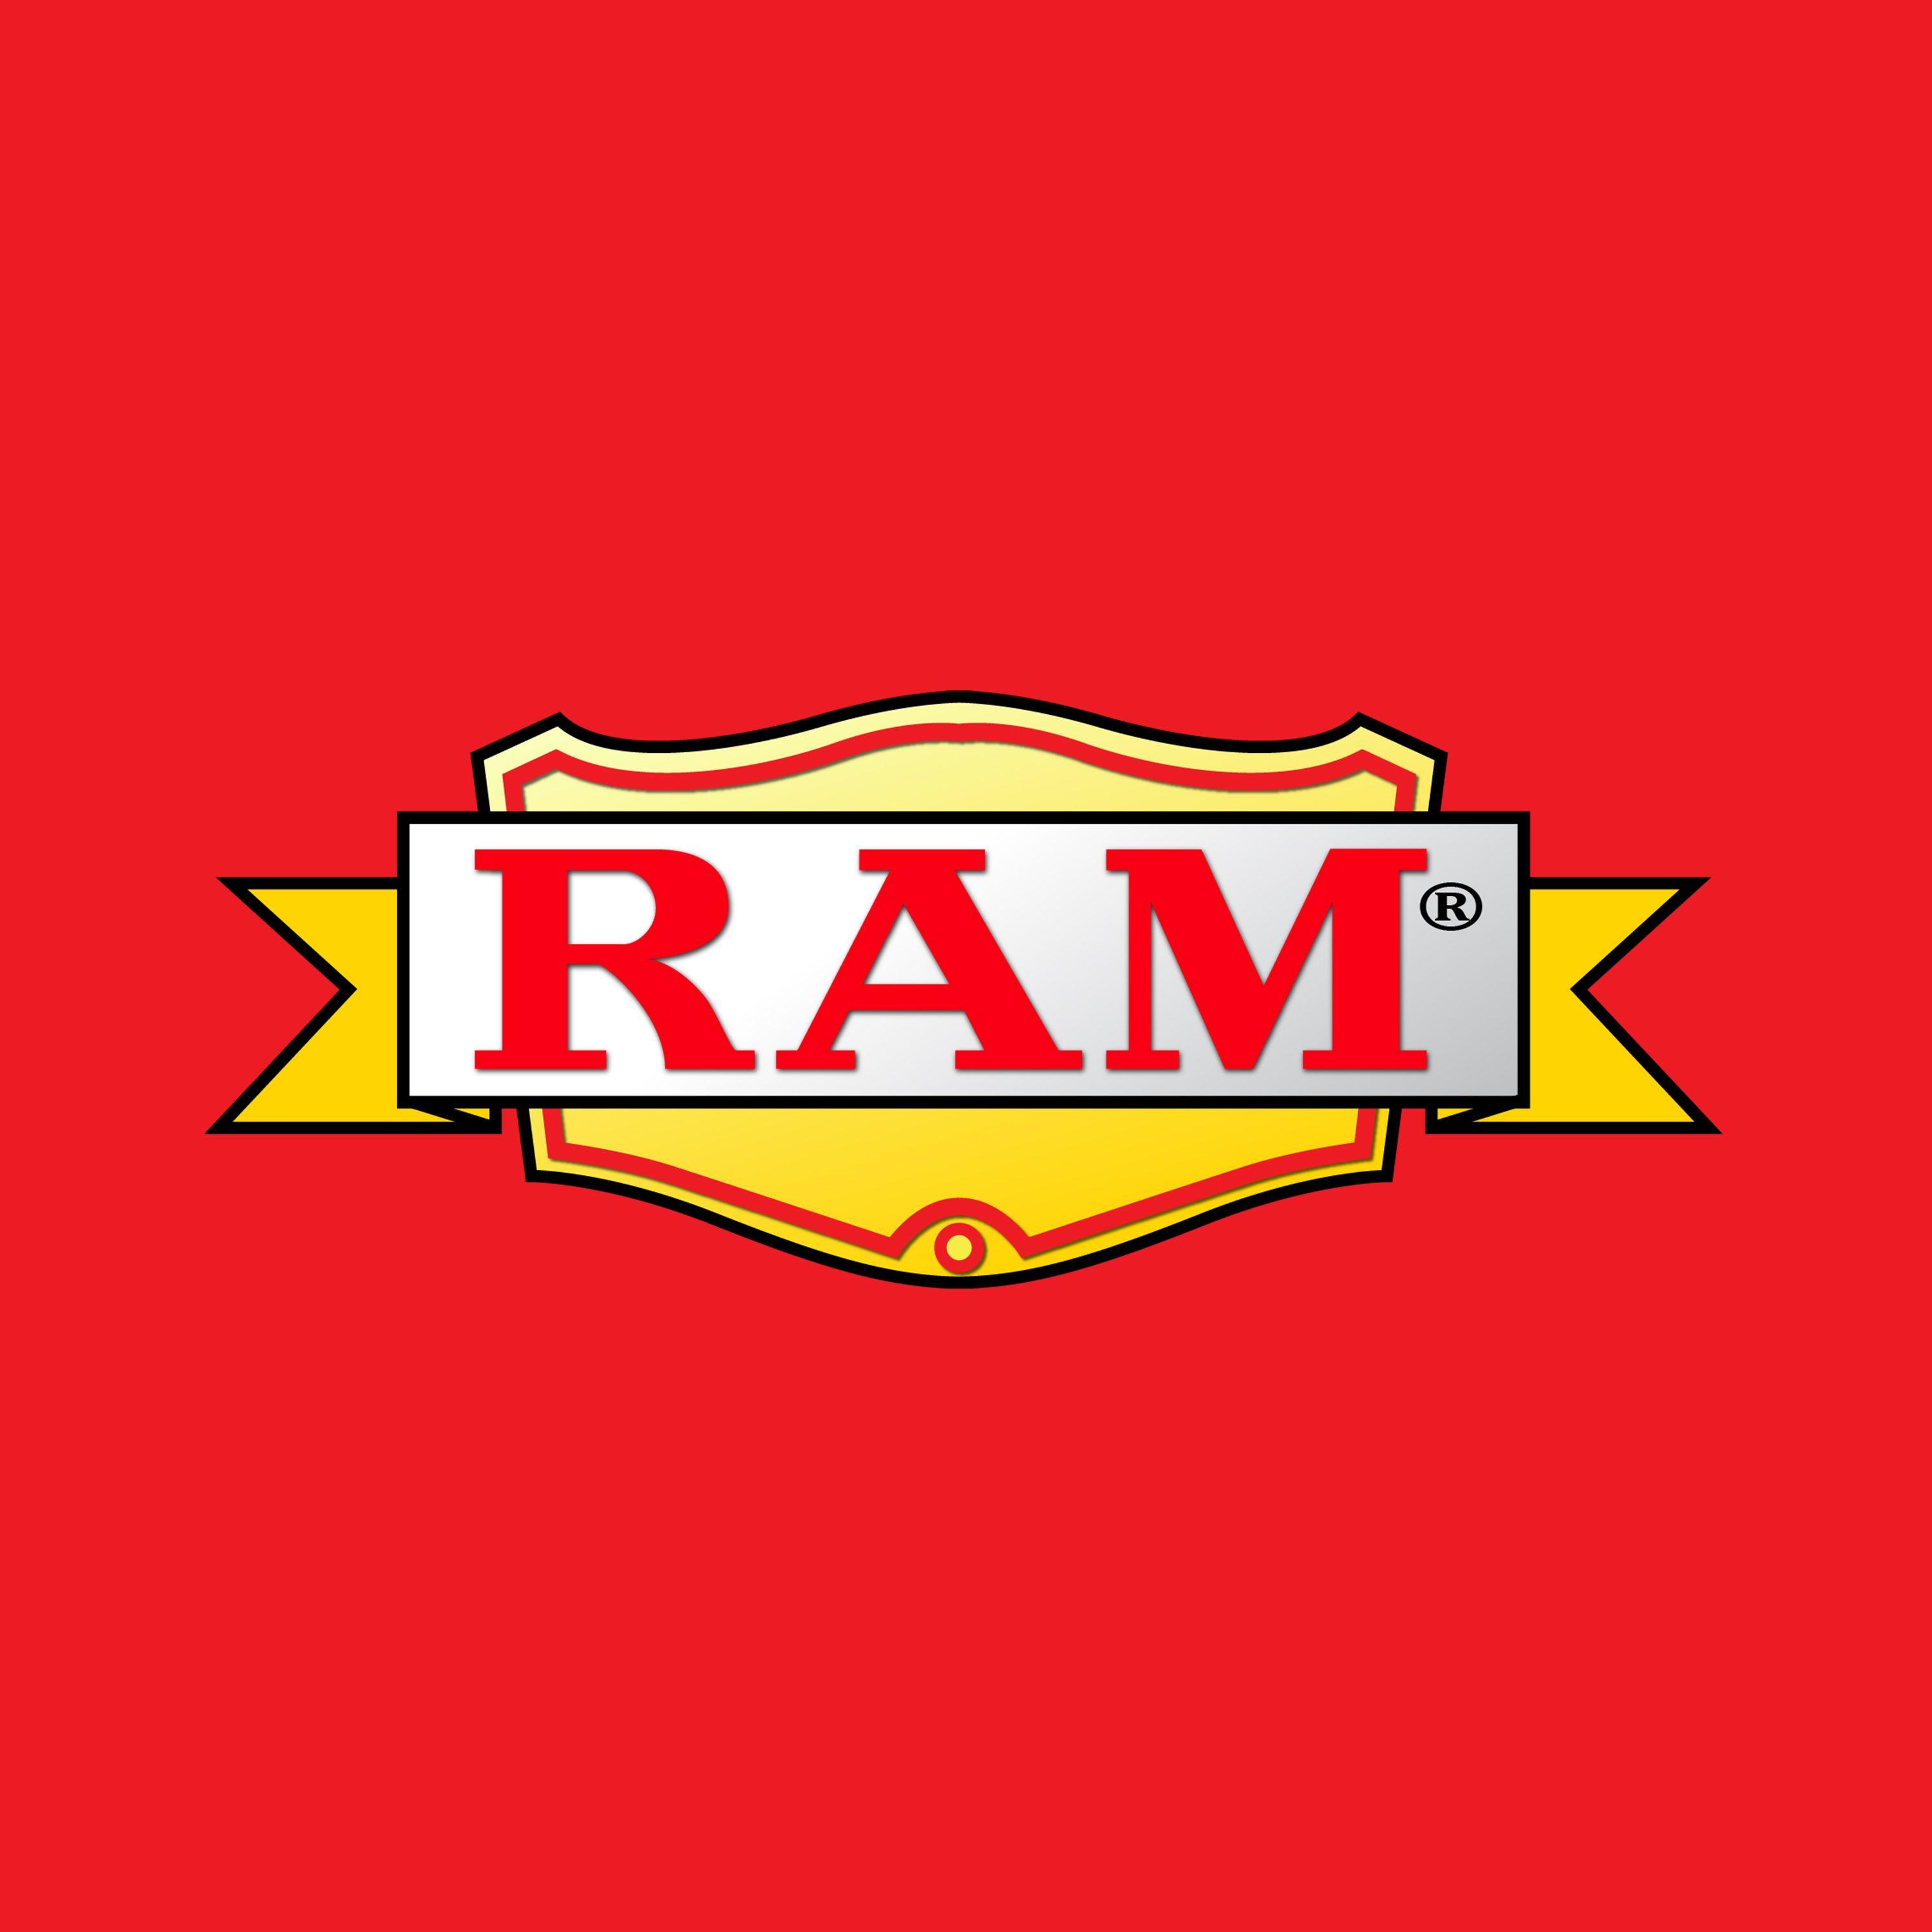 Food Product Logo - Home - Ram Food Products, Inc.